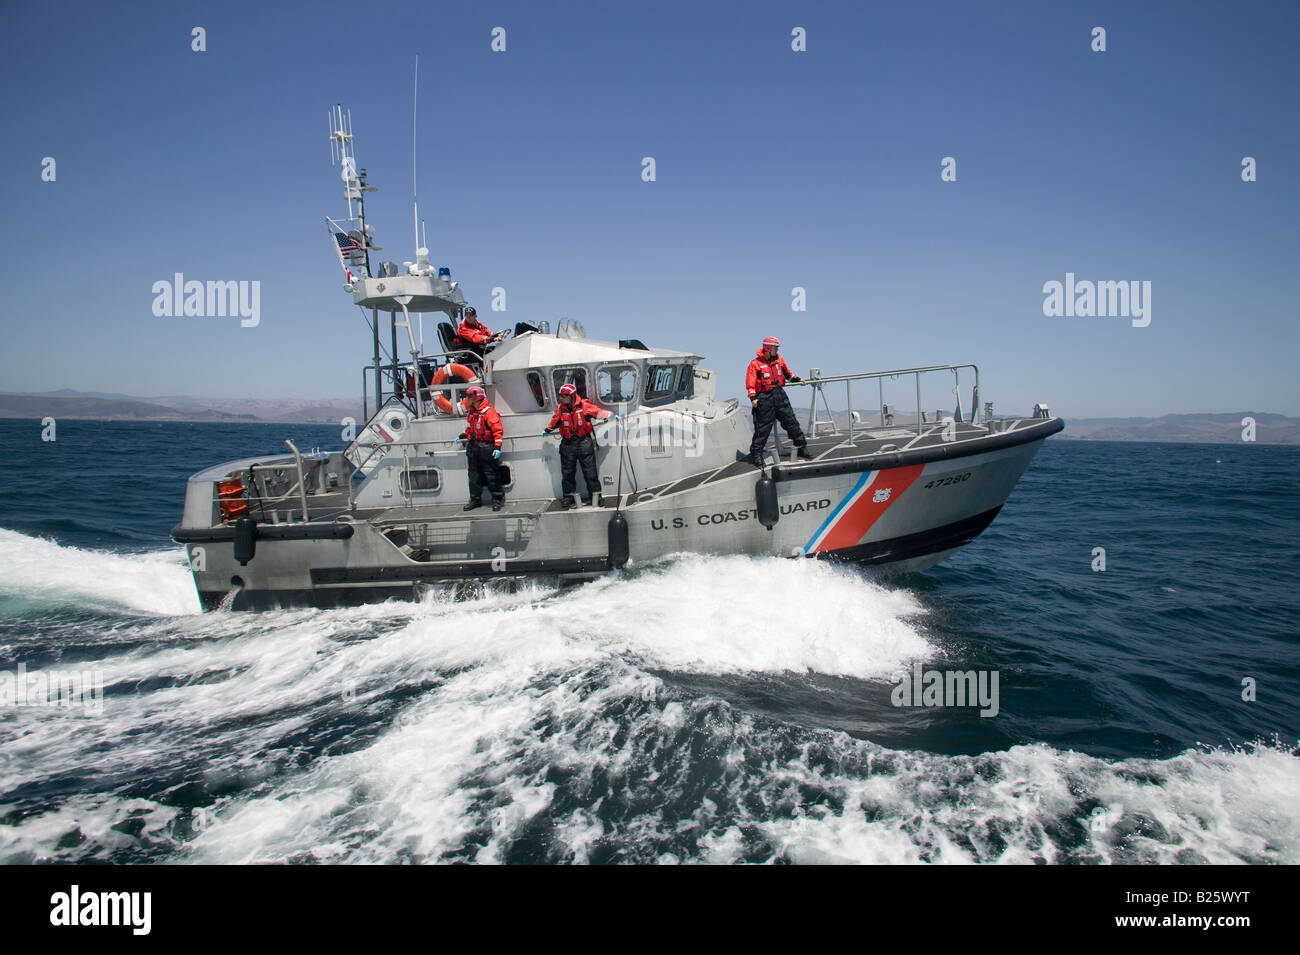 United States Coast Guard prepares to board another boat Stock Photo